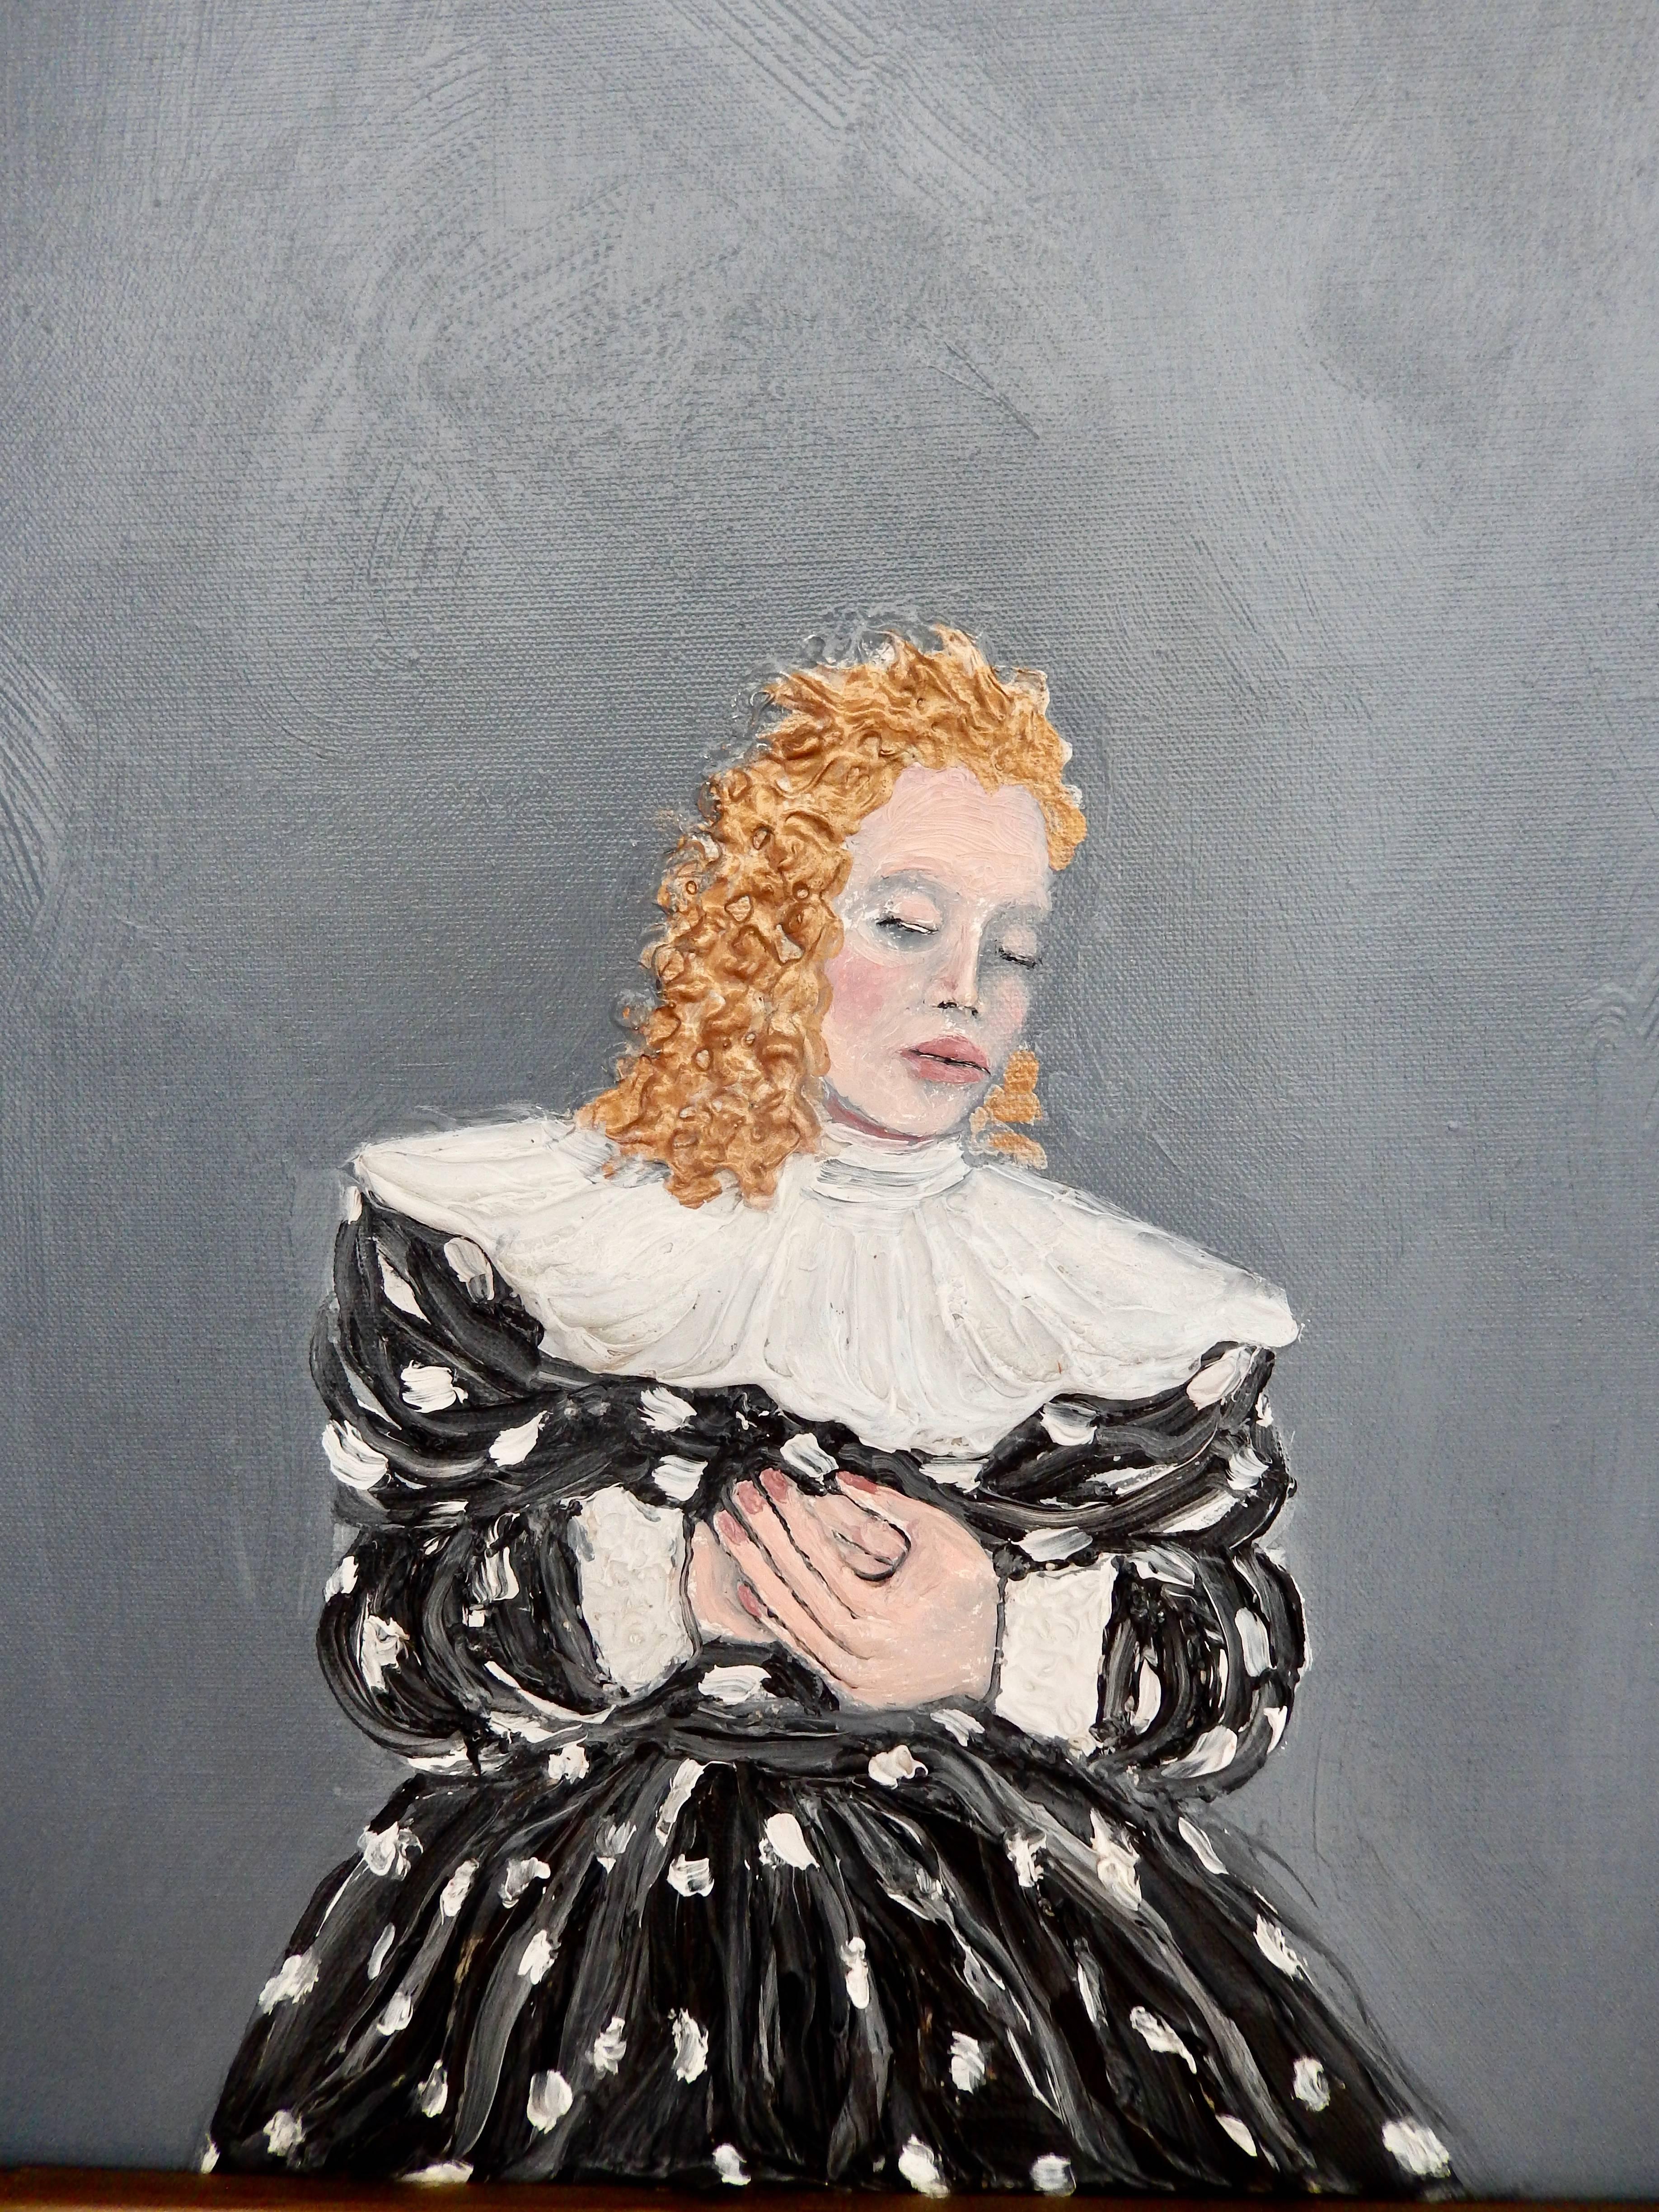 An intimate oil painting by Nicholas Africano (B. 1948) from 1982 titled "Minnie." Minnie refers to a character in Puccini's opera, La Fanciulla del West (The Girl of the Golden West) who was the owner of a saloon with whom all the male